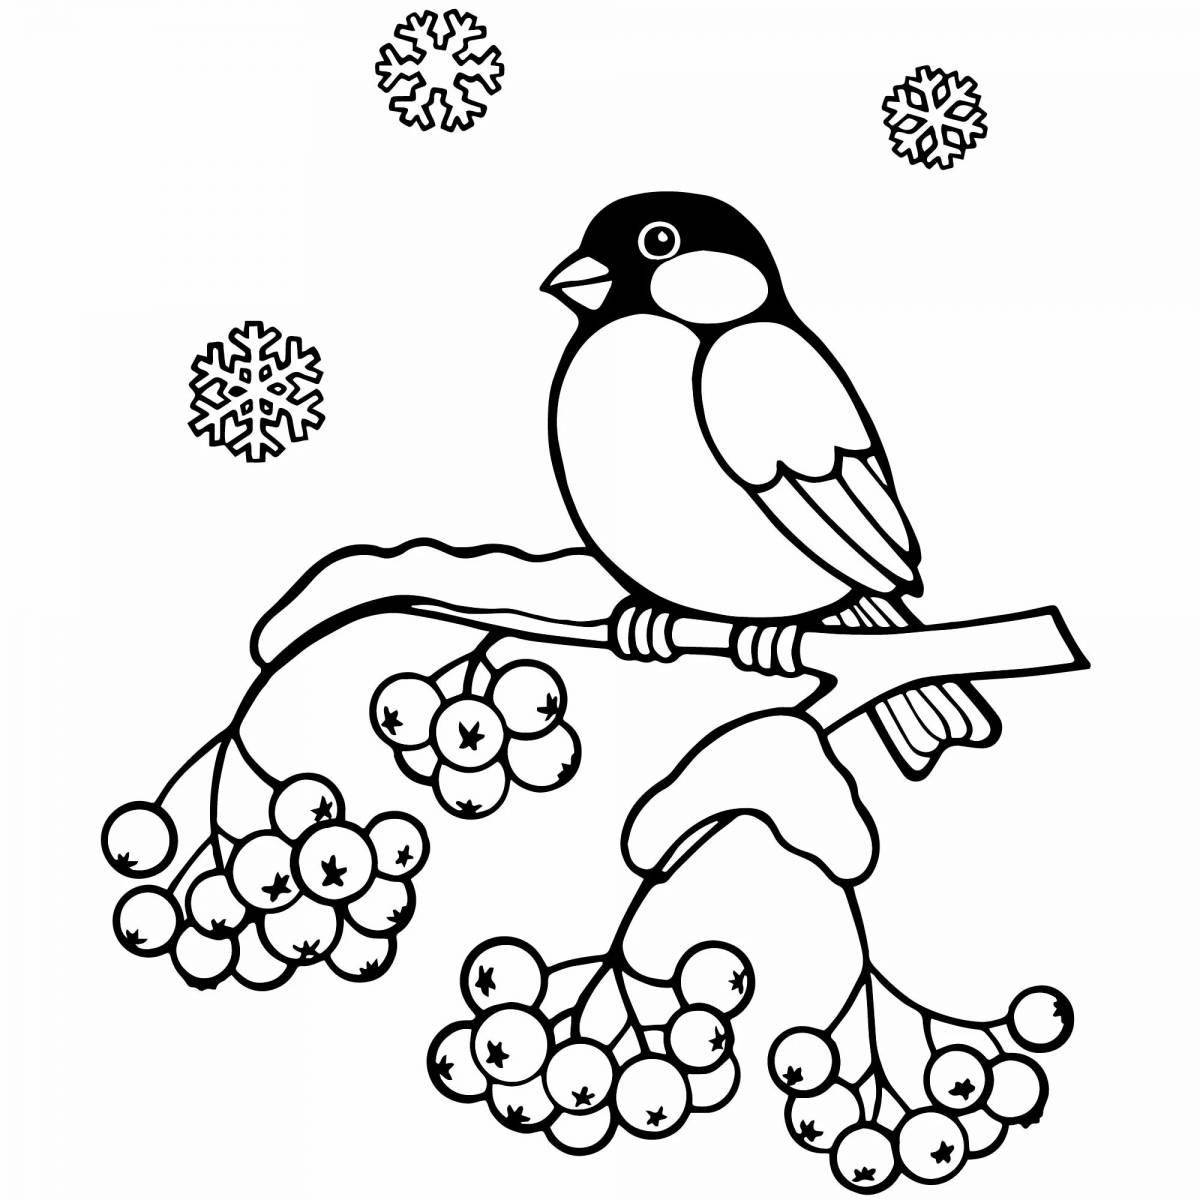 Unbeatable 1st grade bird coloring page